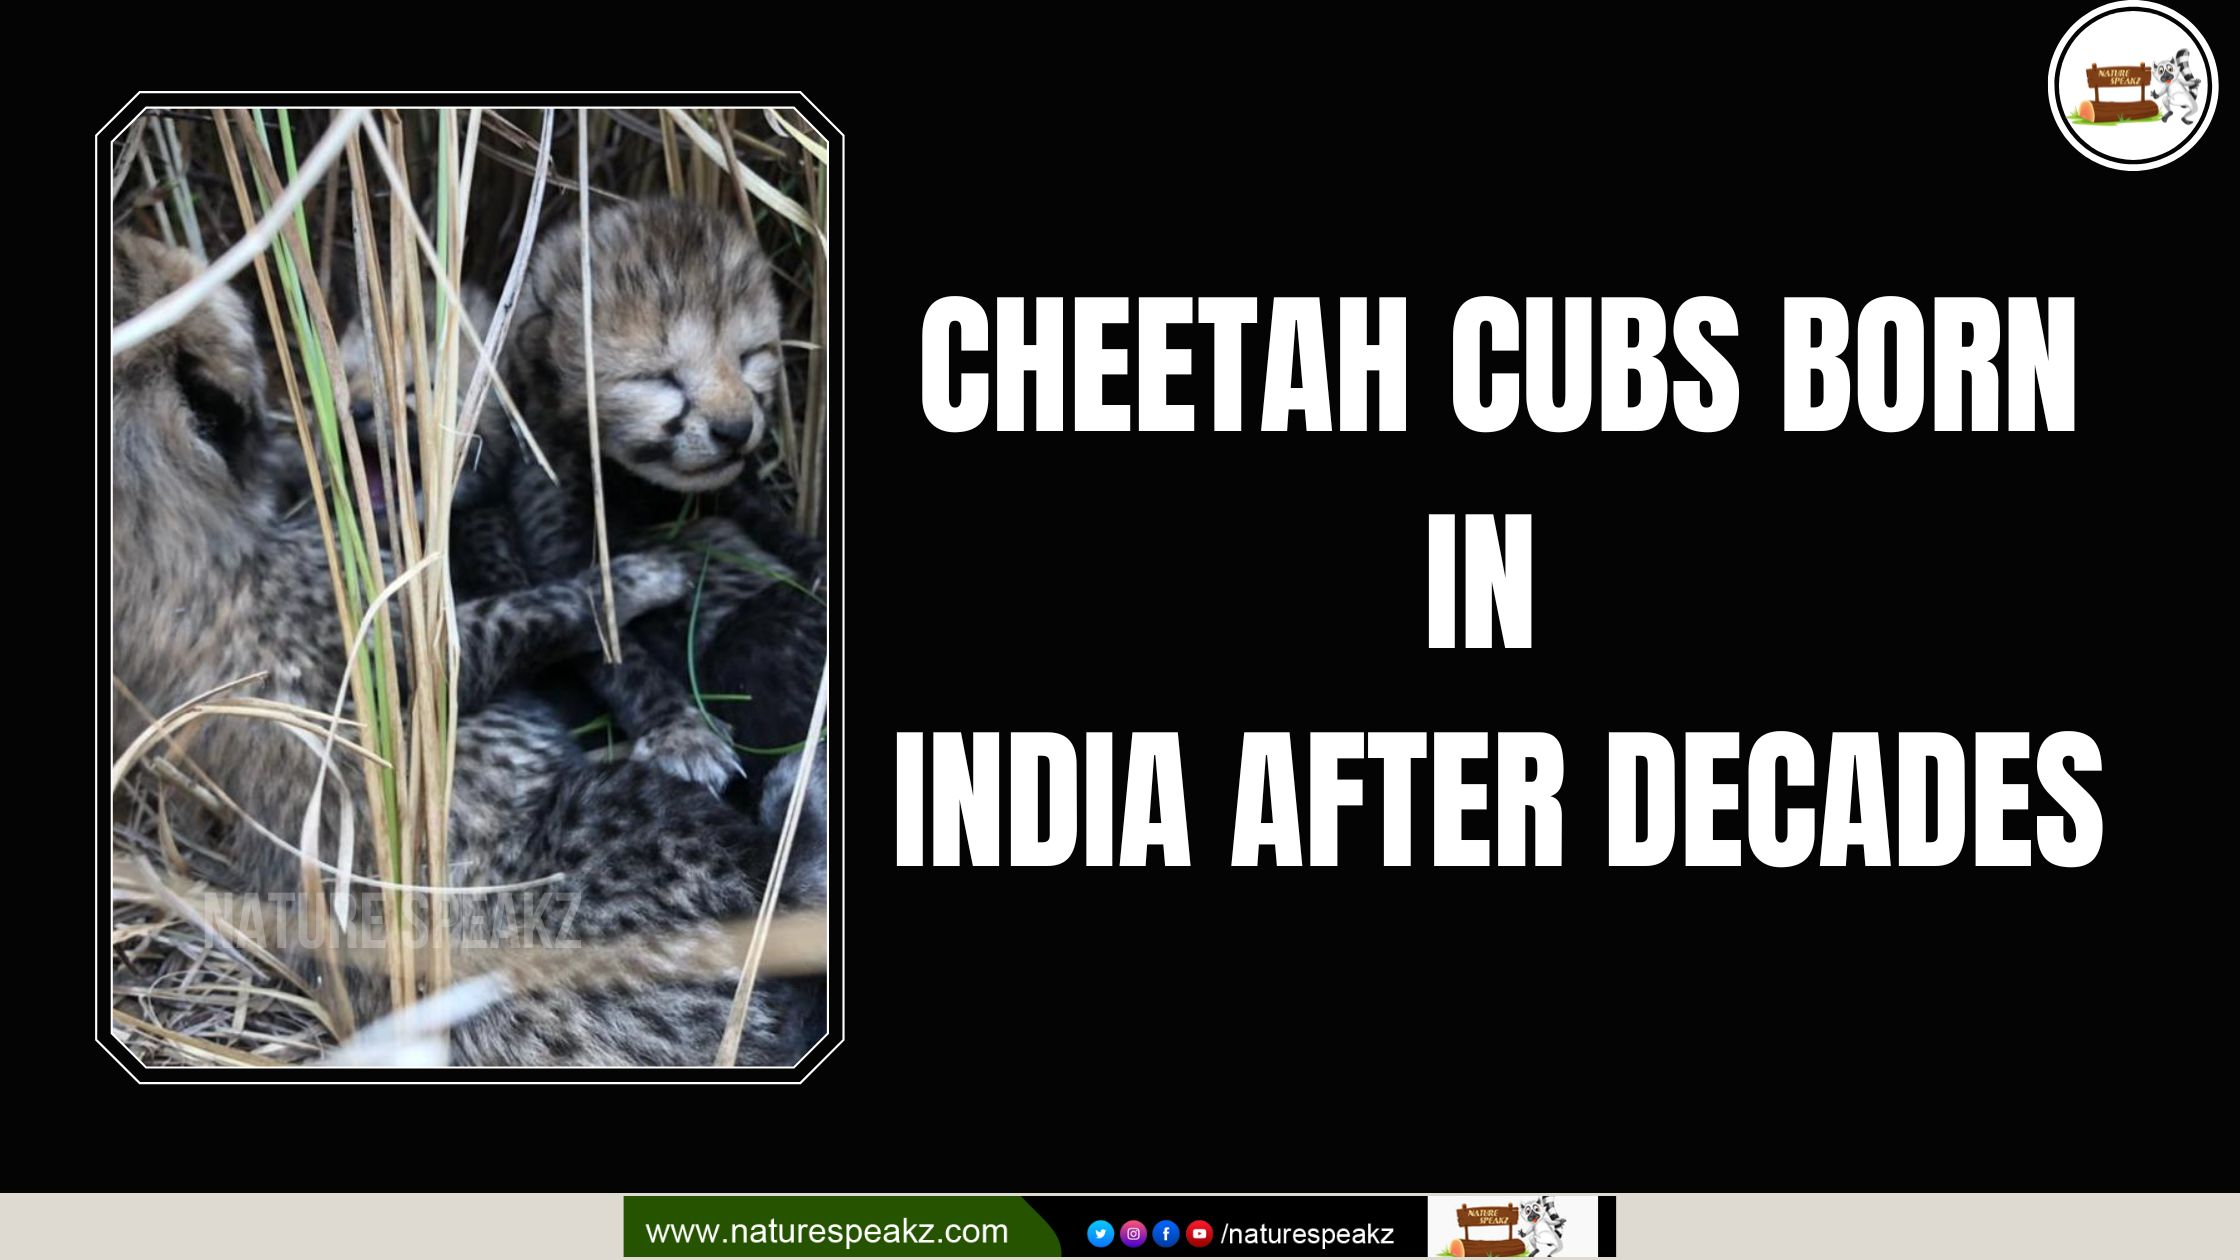 Cheetah cubs born in India after decades